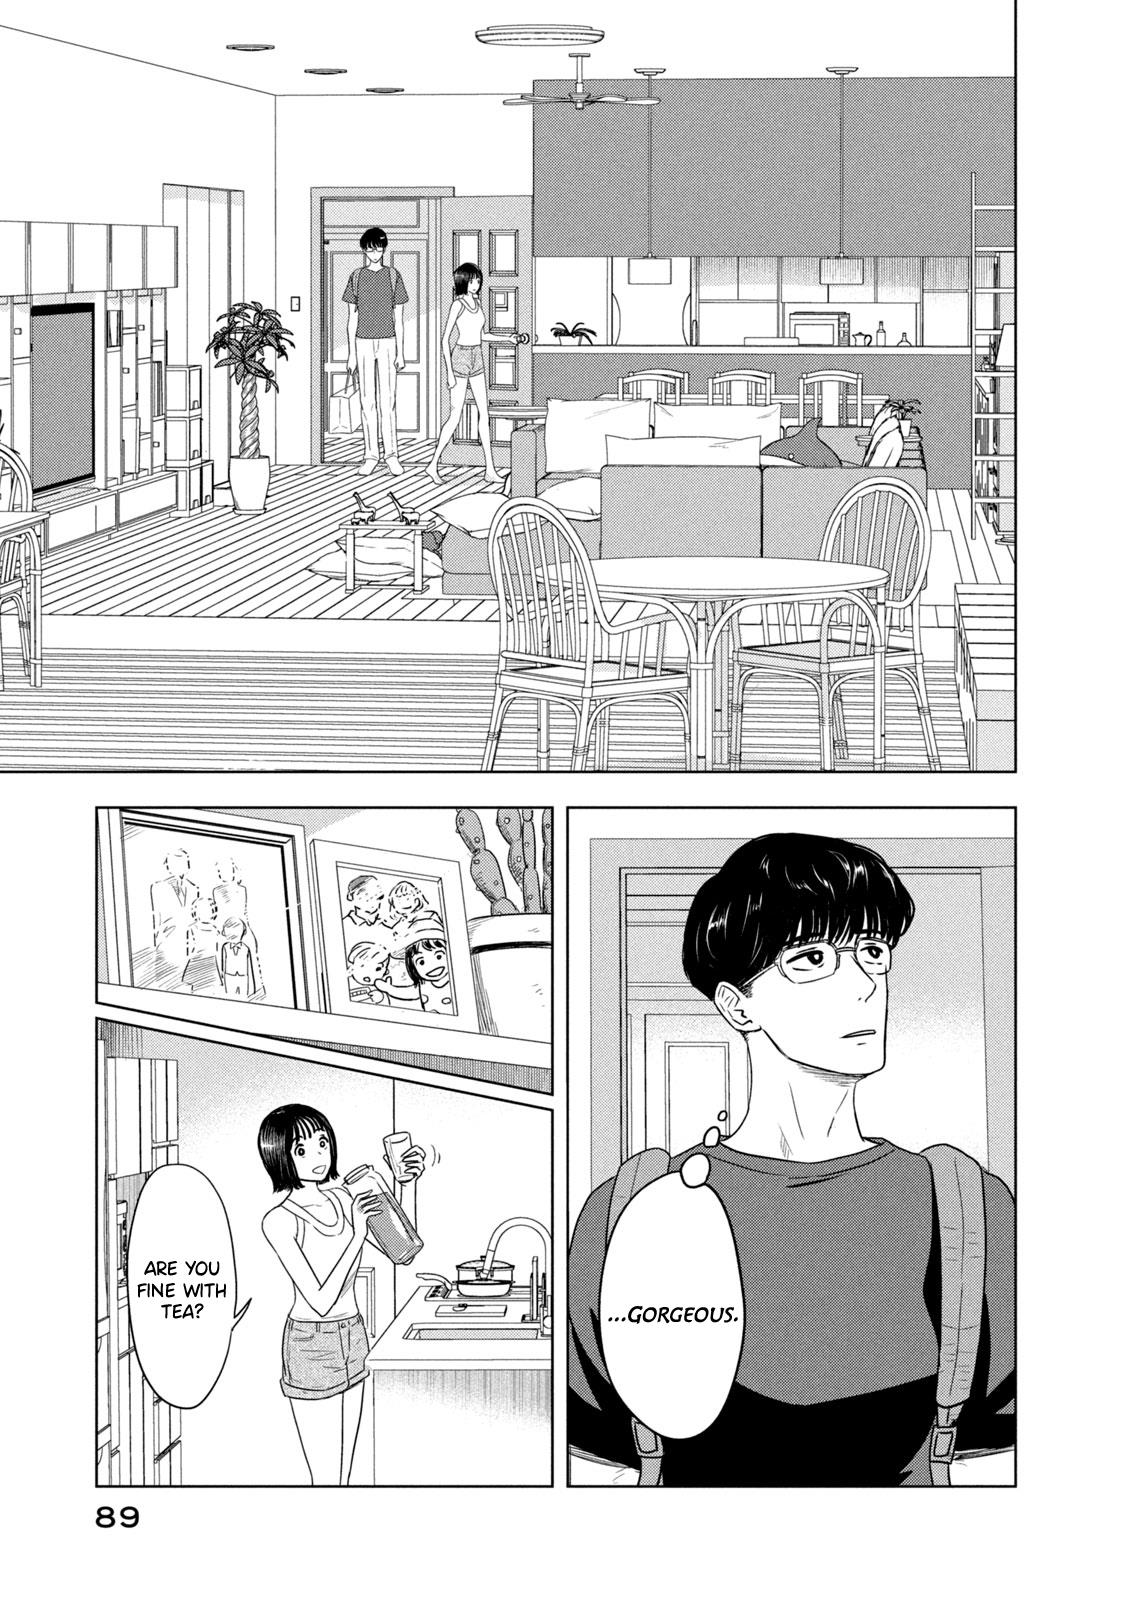 8-Gatsu 31-Nichi No Long Summer Vol.1 Chapter 5: August 31 Invited Over - Picture 3